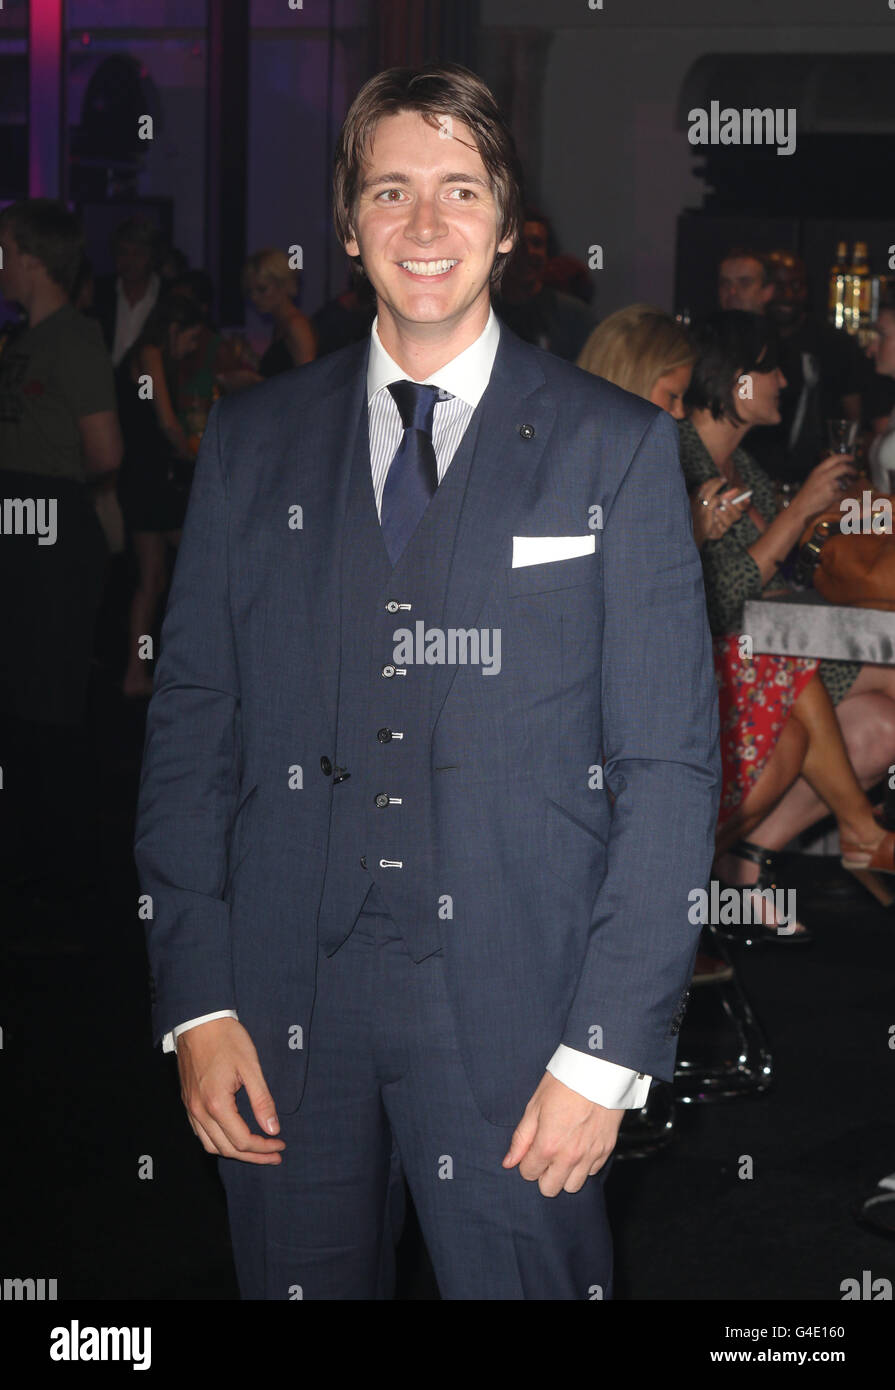 James Phelps arrives at the after show party for 'Harry Potter and the Deathly Hallows Part Two', at the Old Billingsgate Market, London. Stock Photo